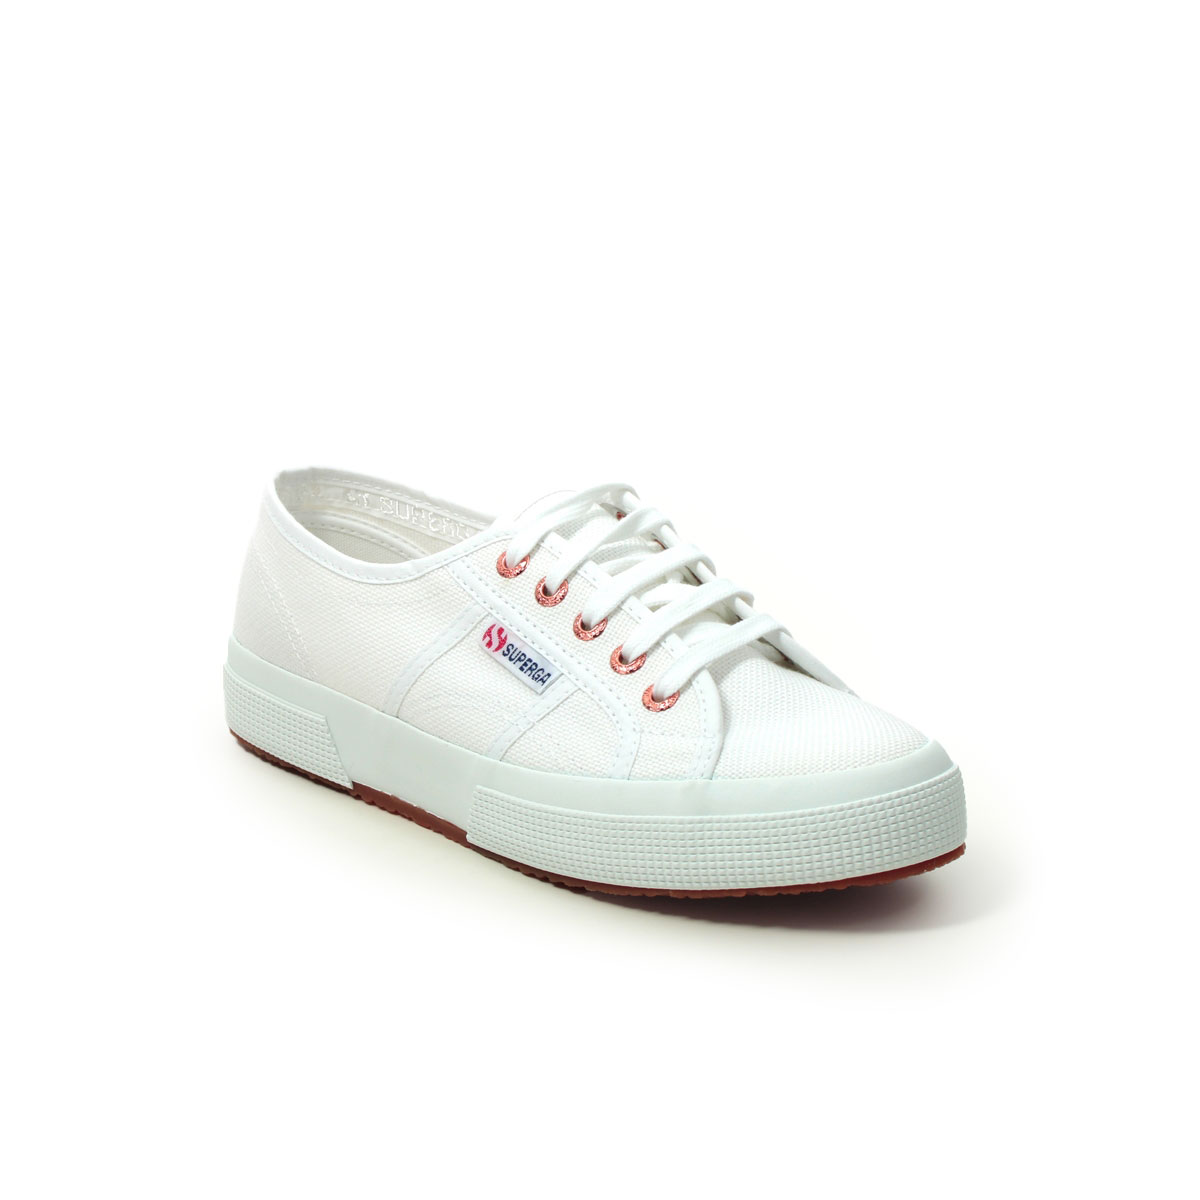 Superga Cotu White Rose gold Womens trainers S000010-C69 in a Plain Canvas in Size 40